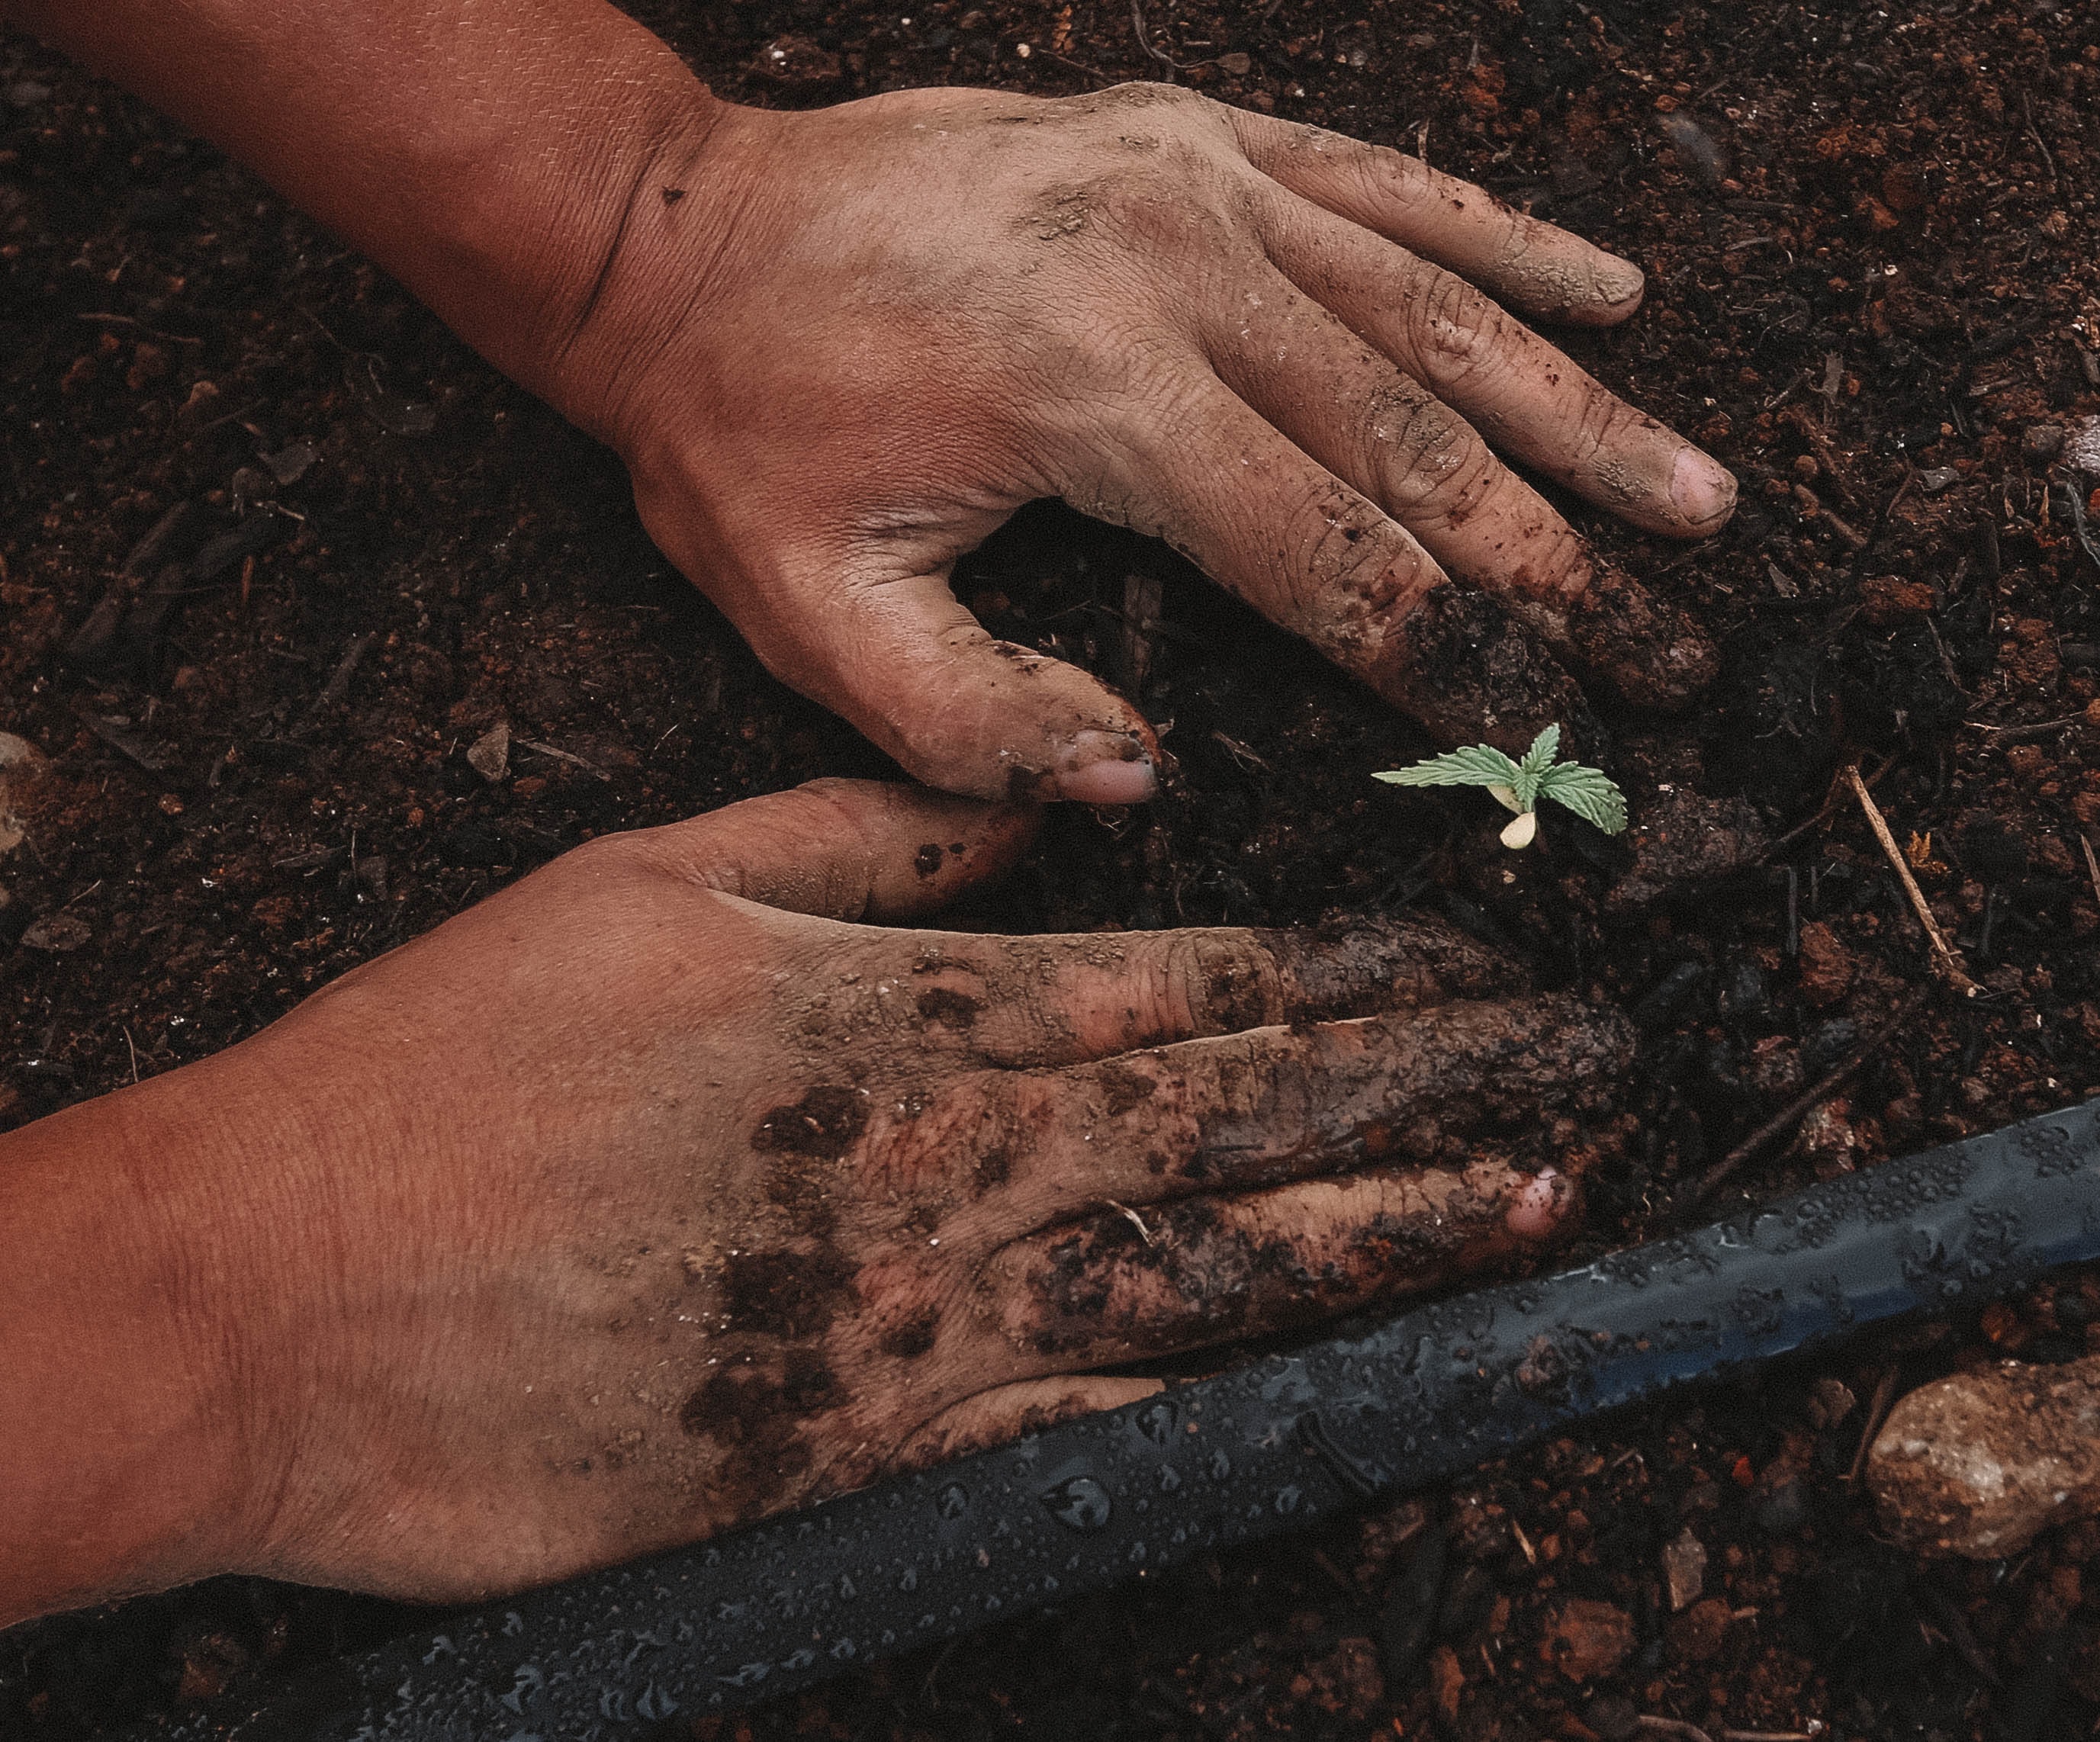 A person’s hands in the dirt, planting a seedling.